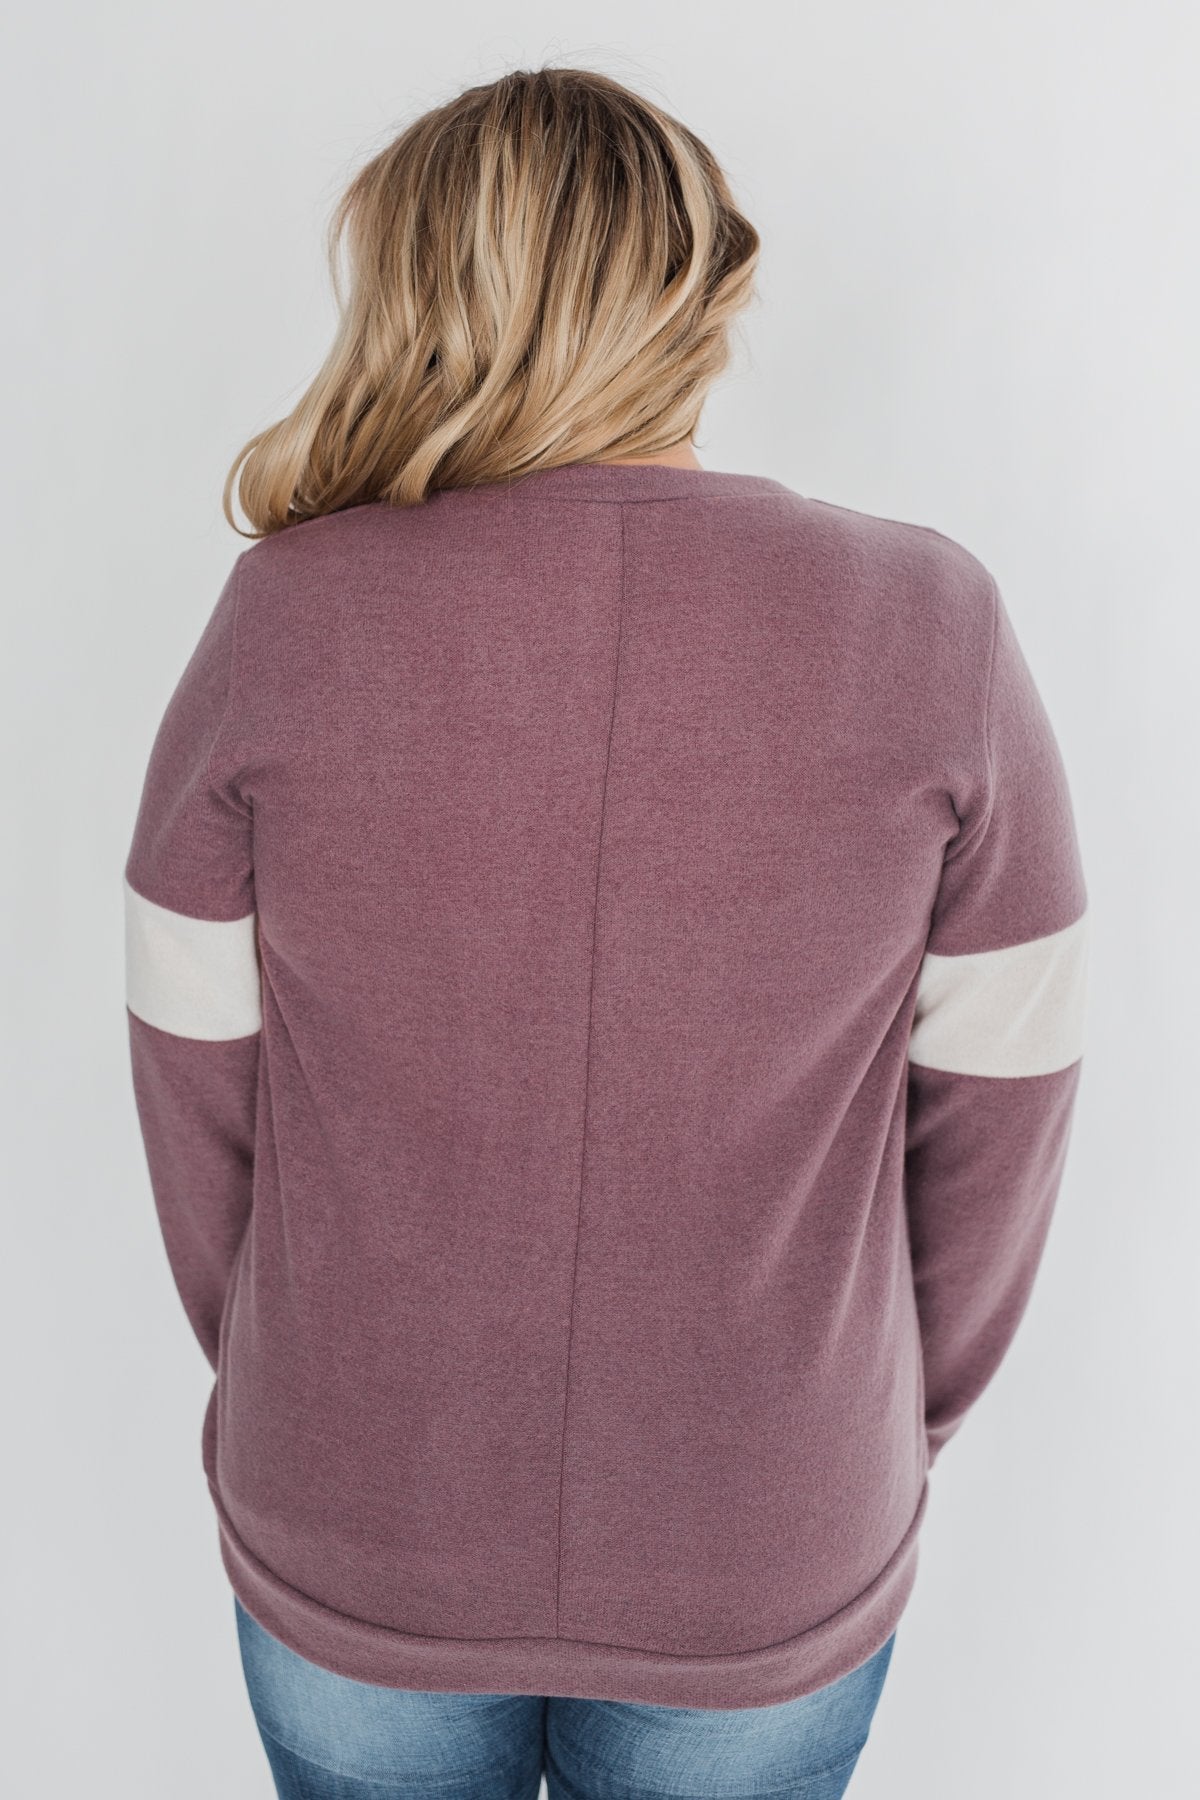 All of Me Long Sleeve Pullover Top - Antique Mauve